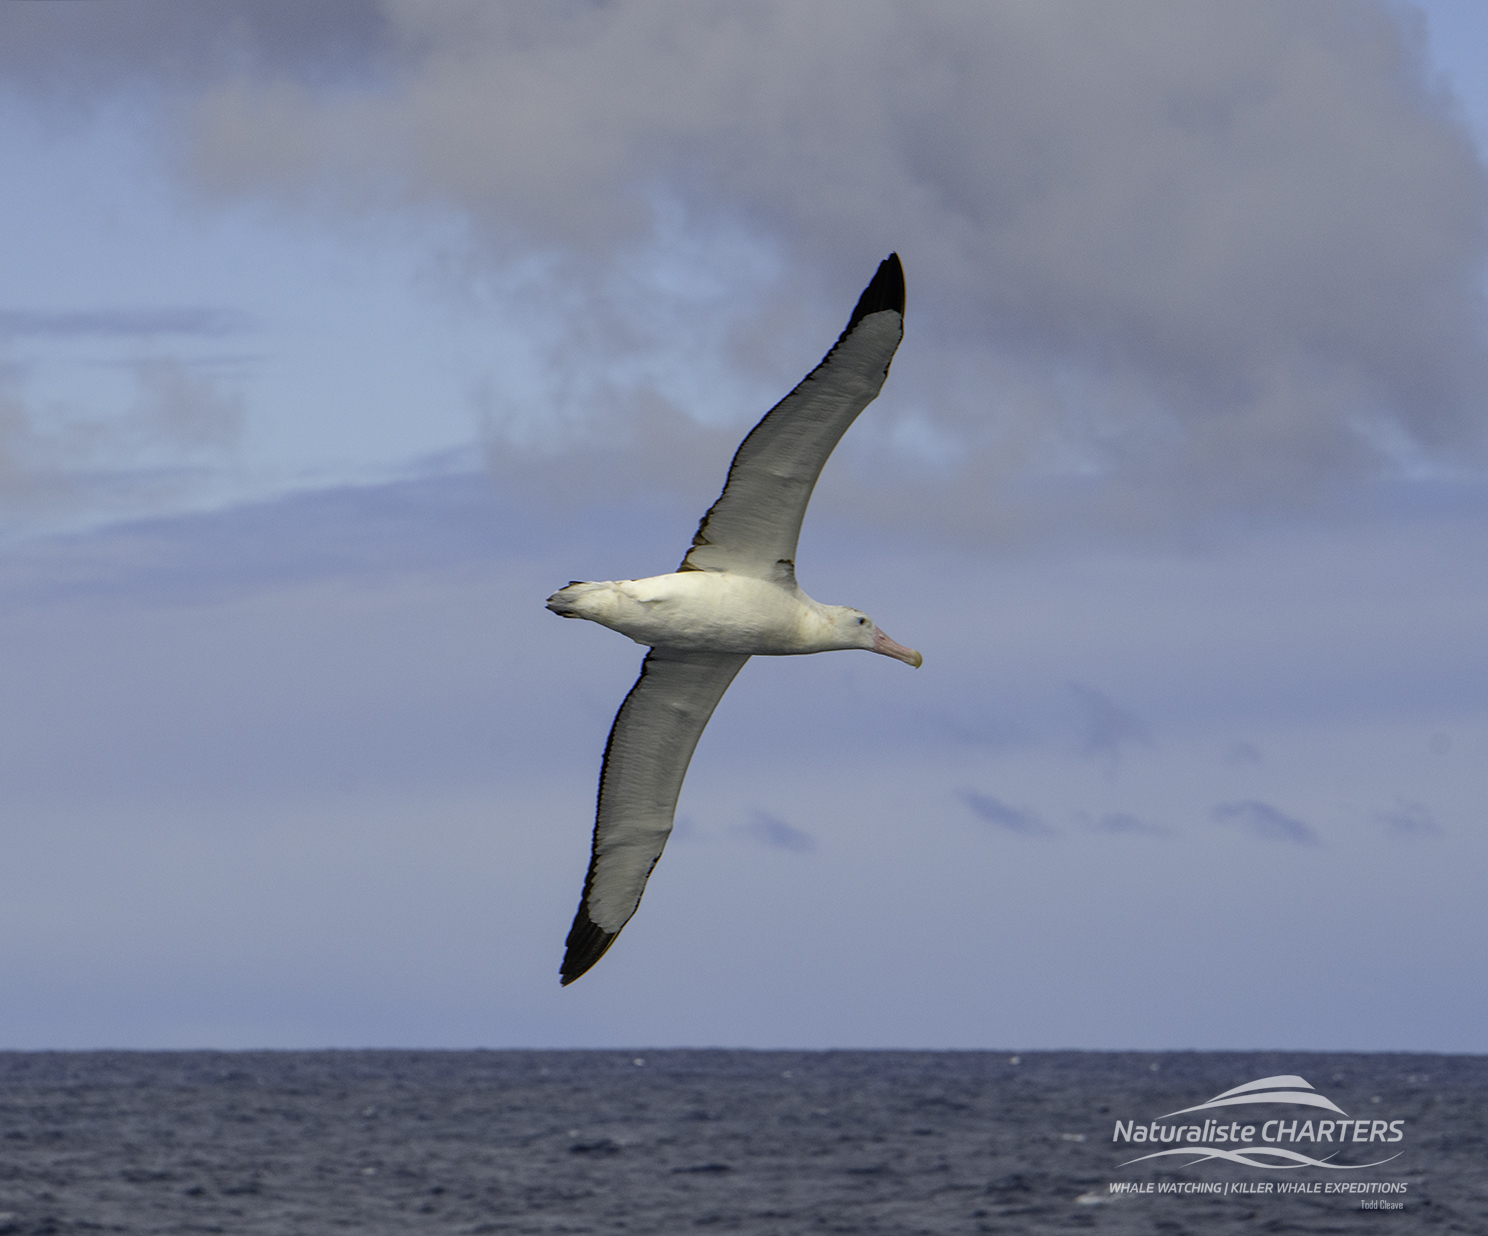 There are many types of pelagic birds species seen on the expeditions